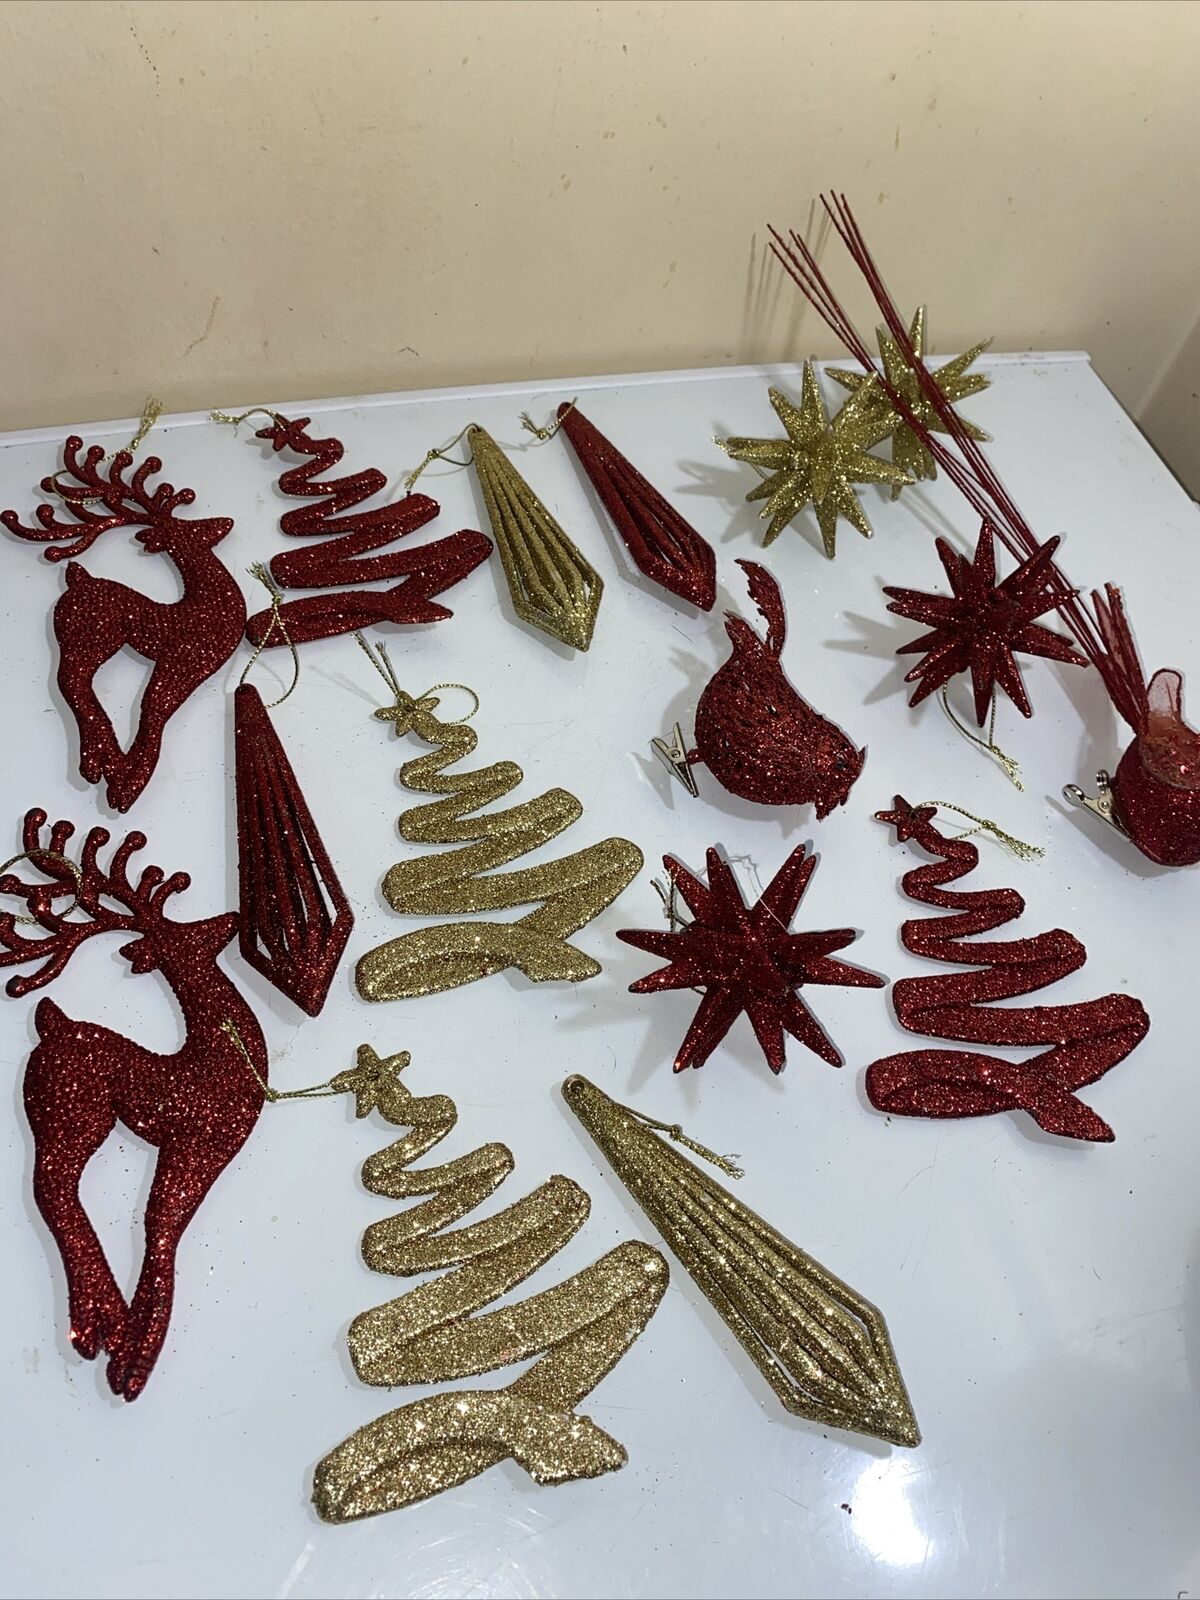 Lot of Assorted Christmas Glittery Ornaments